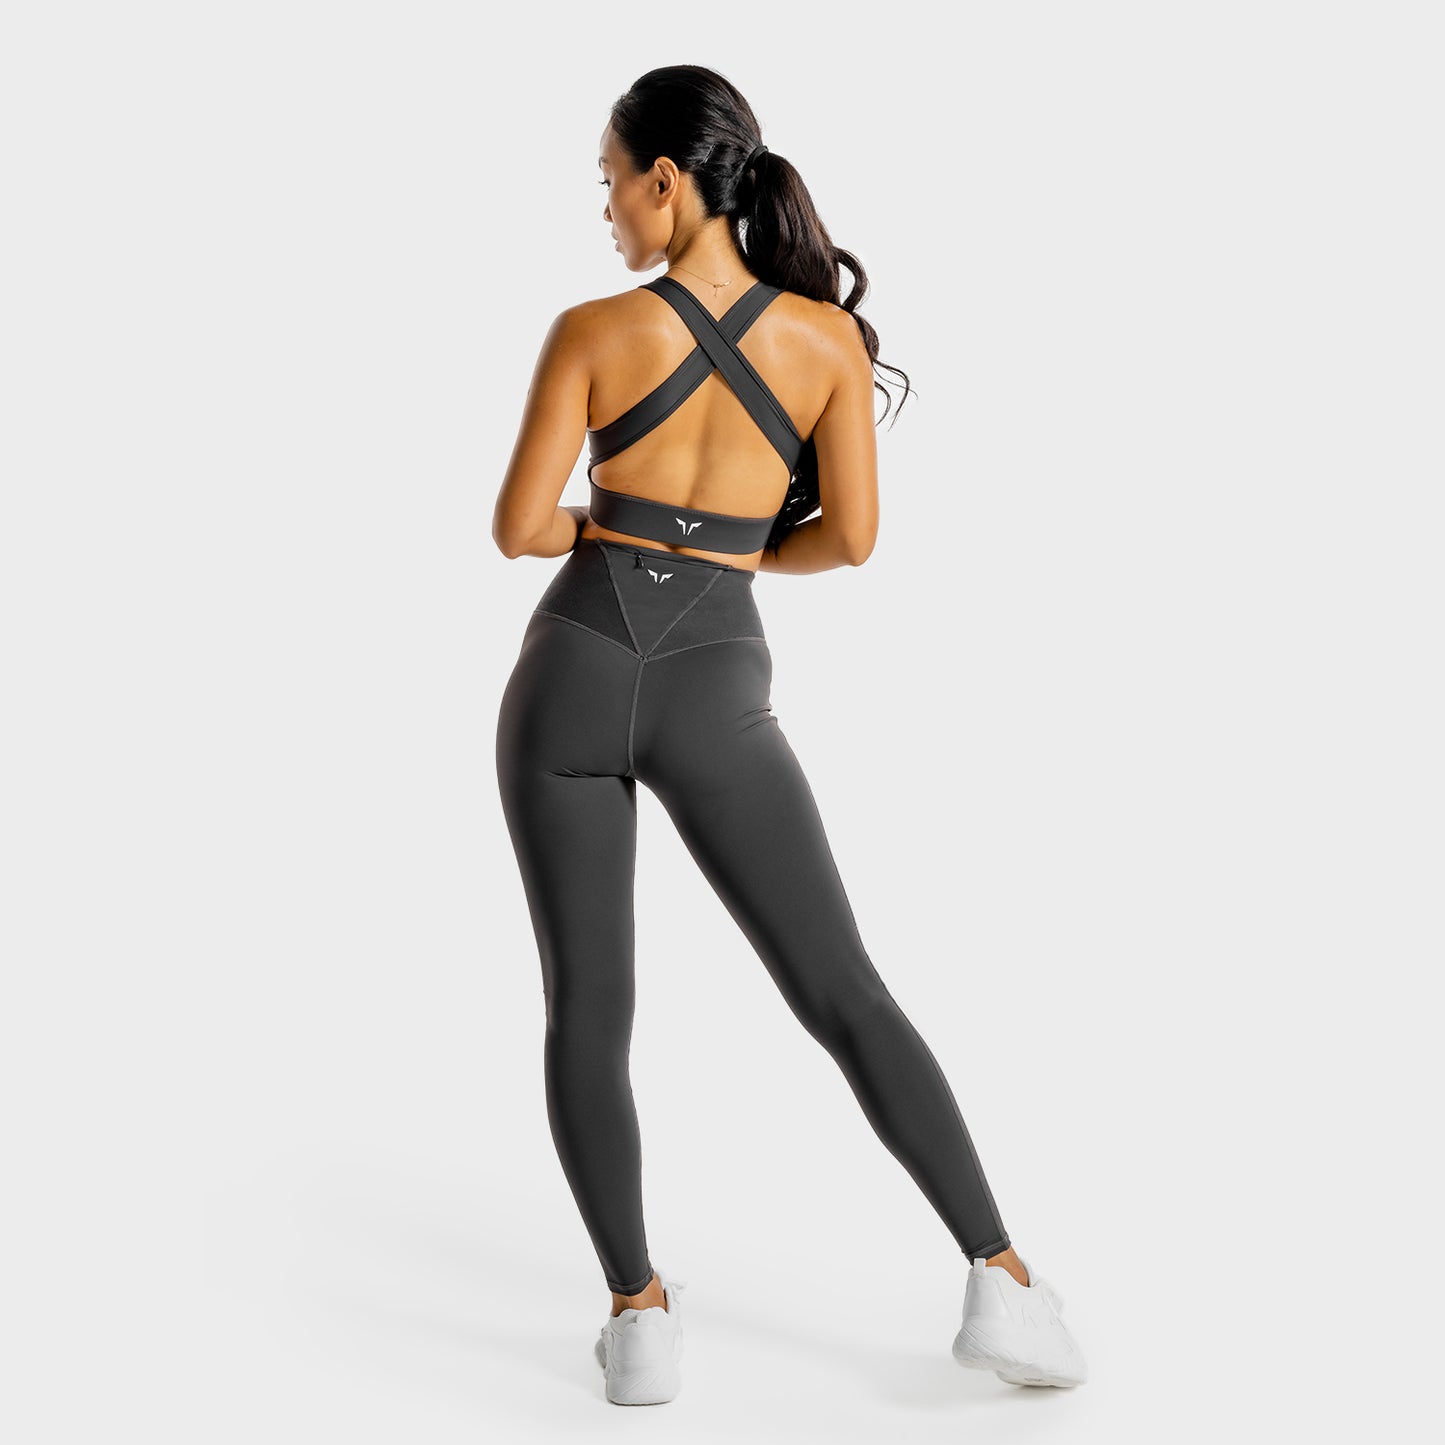 squatwolf-gym-leggings-for-women-core-leggings-charcoal-workout-clothes